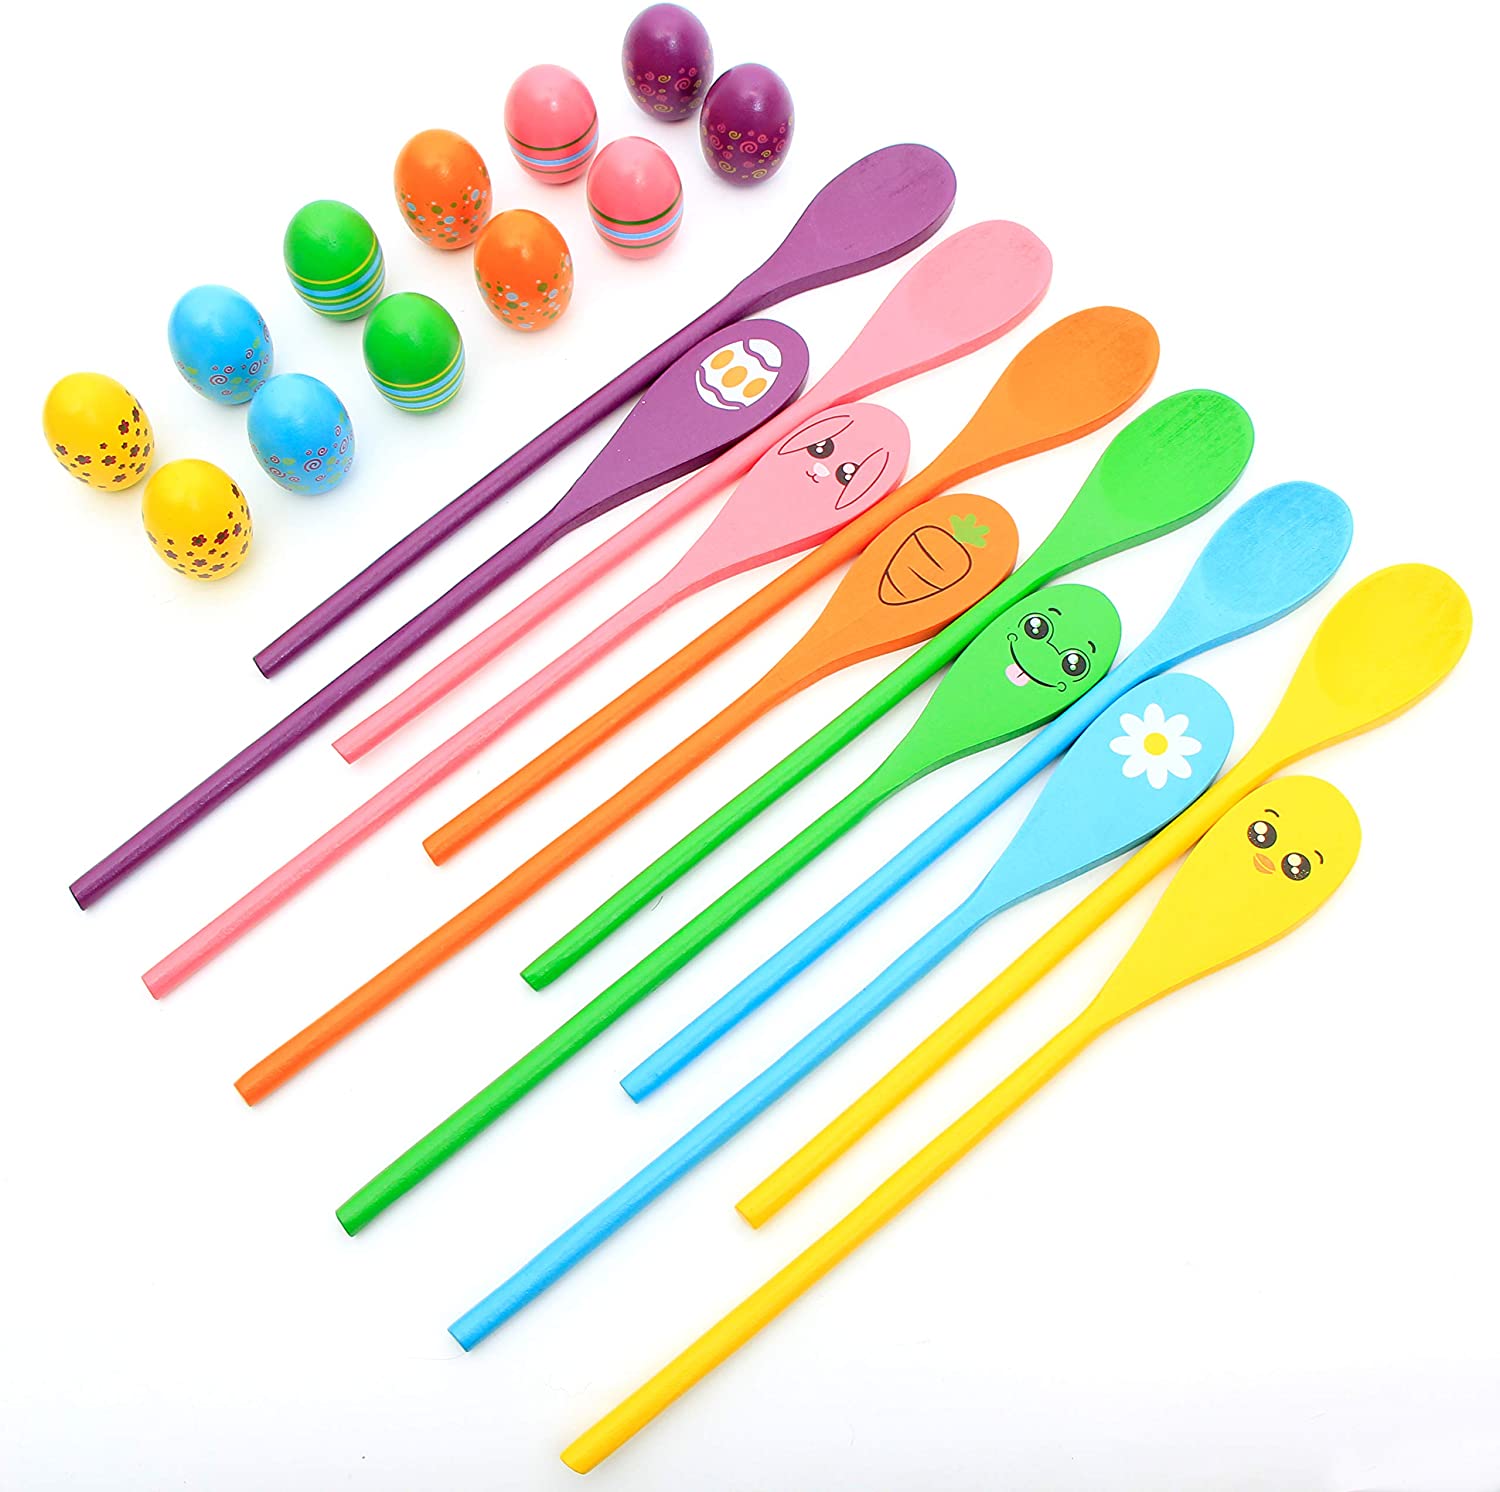 12pcs Egg and Spoon Relay Race Game